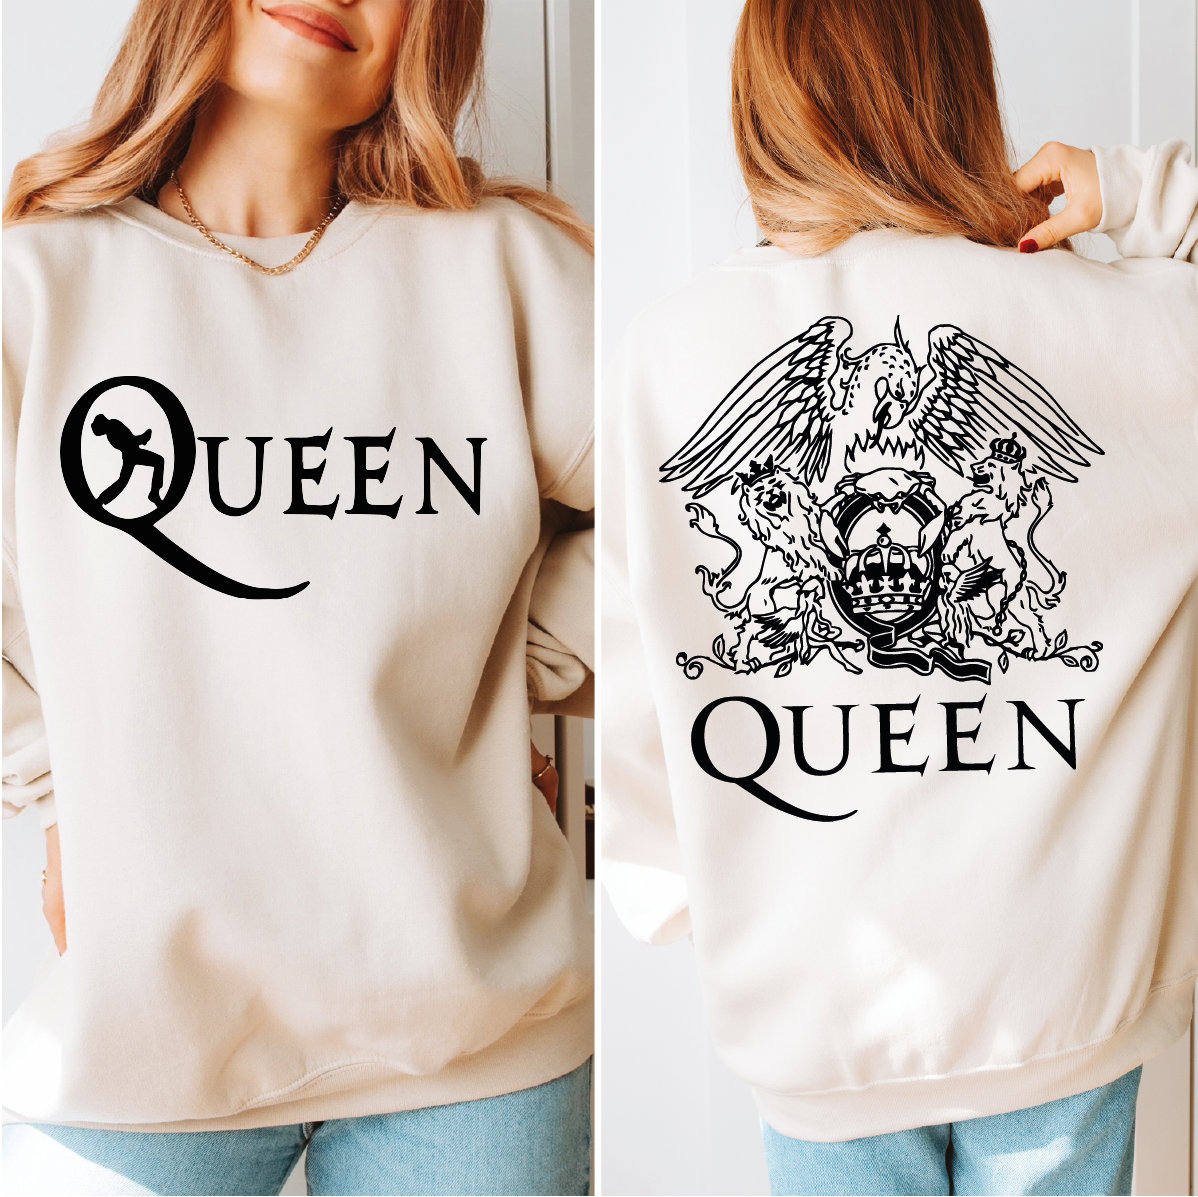 Queen - Band Vintage Shirt Etsy